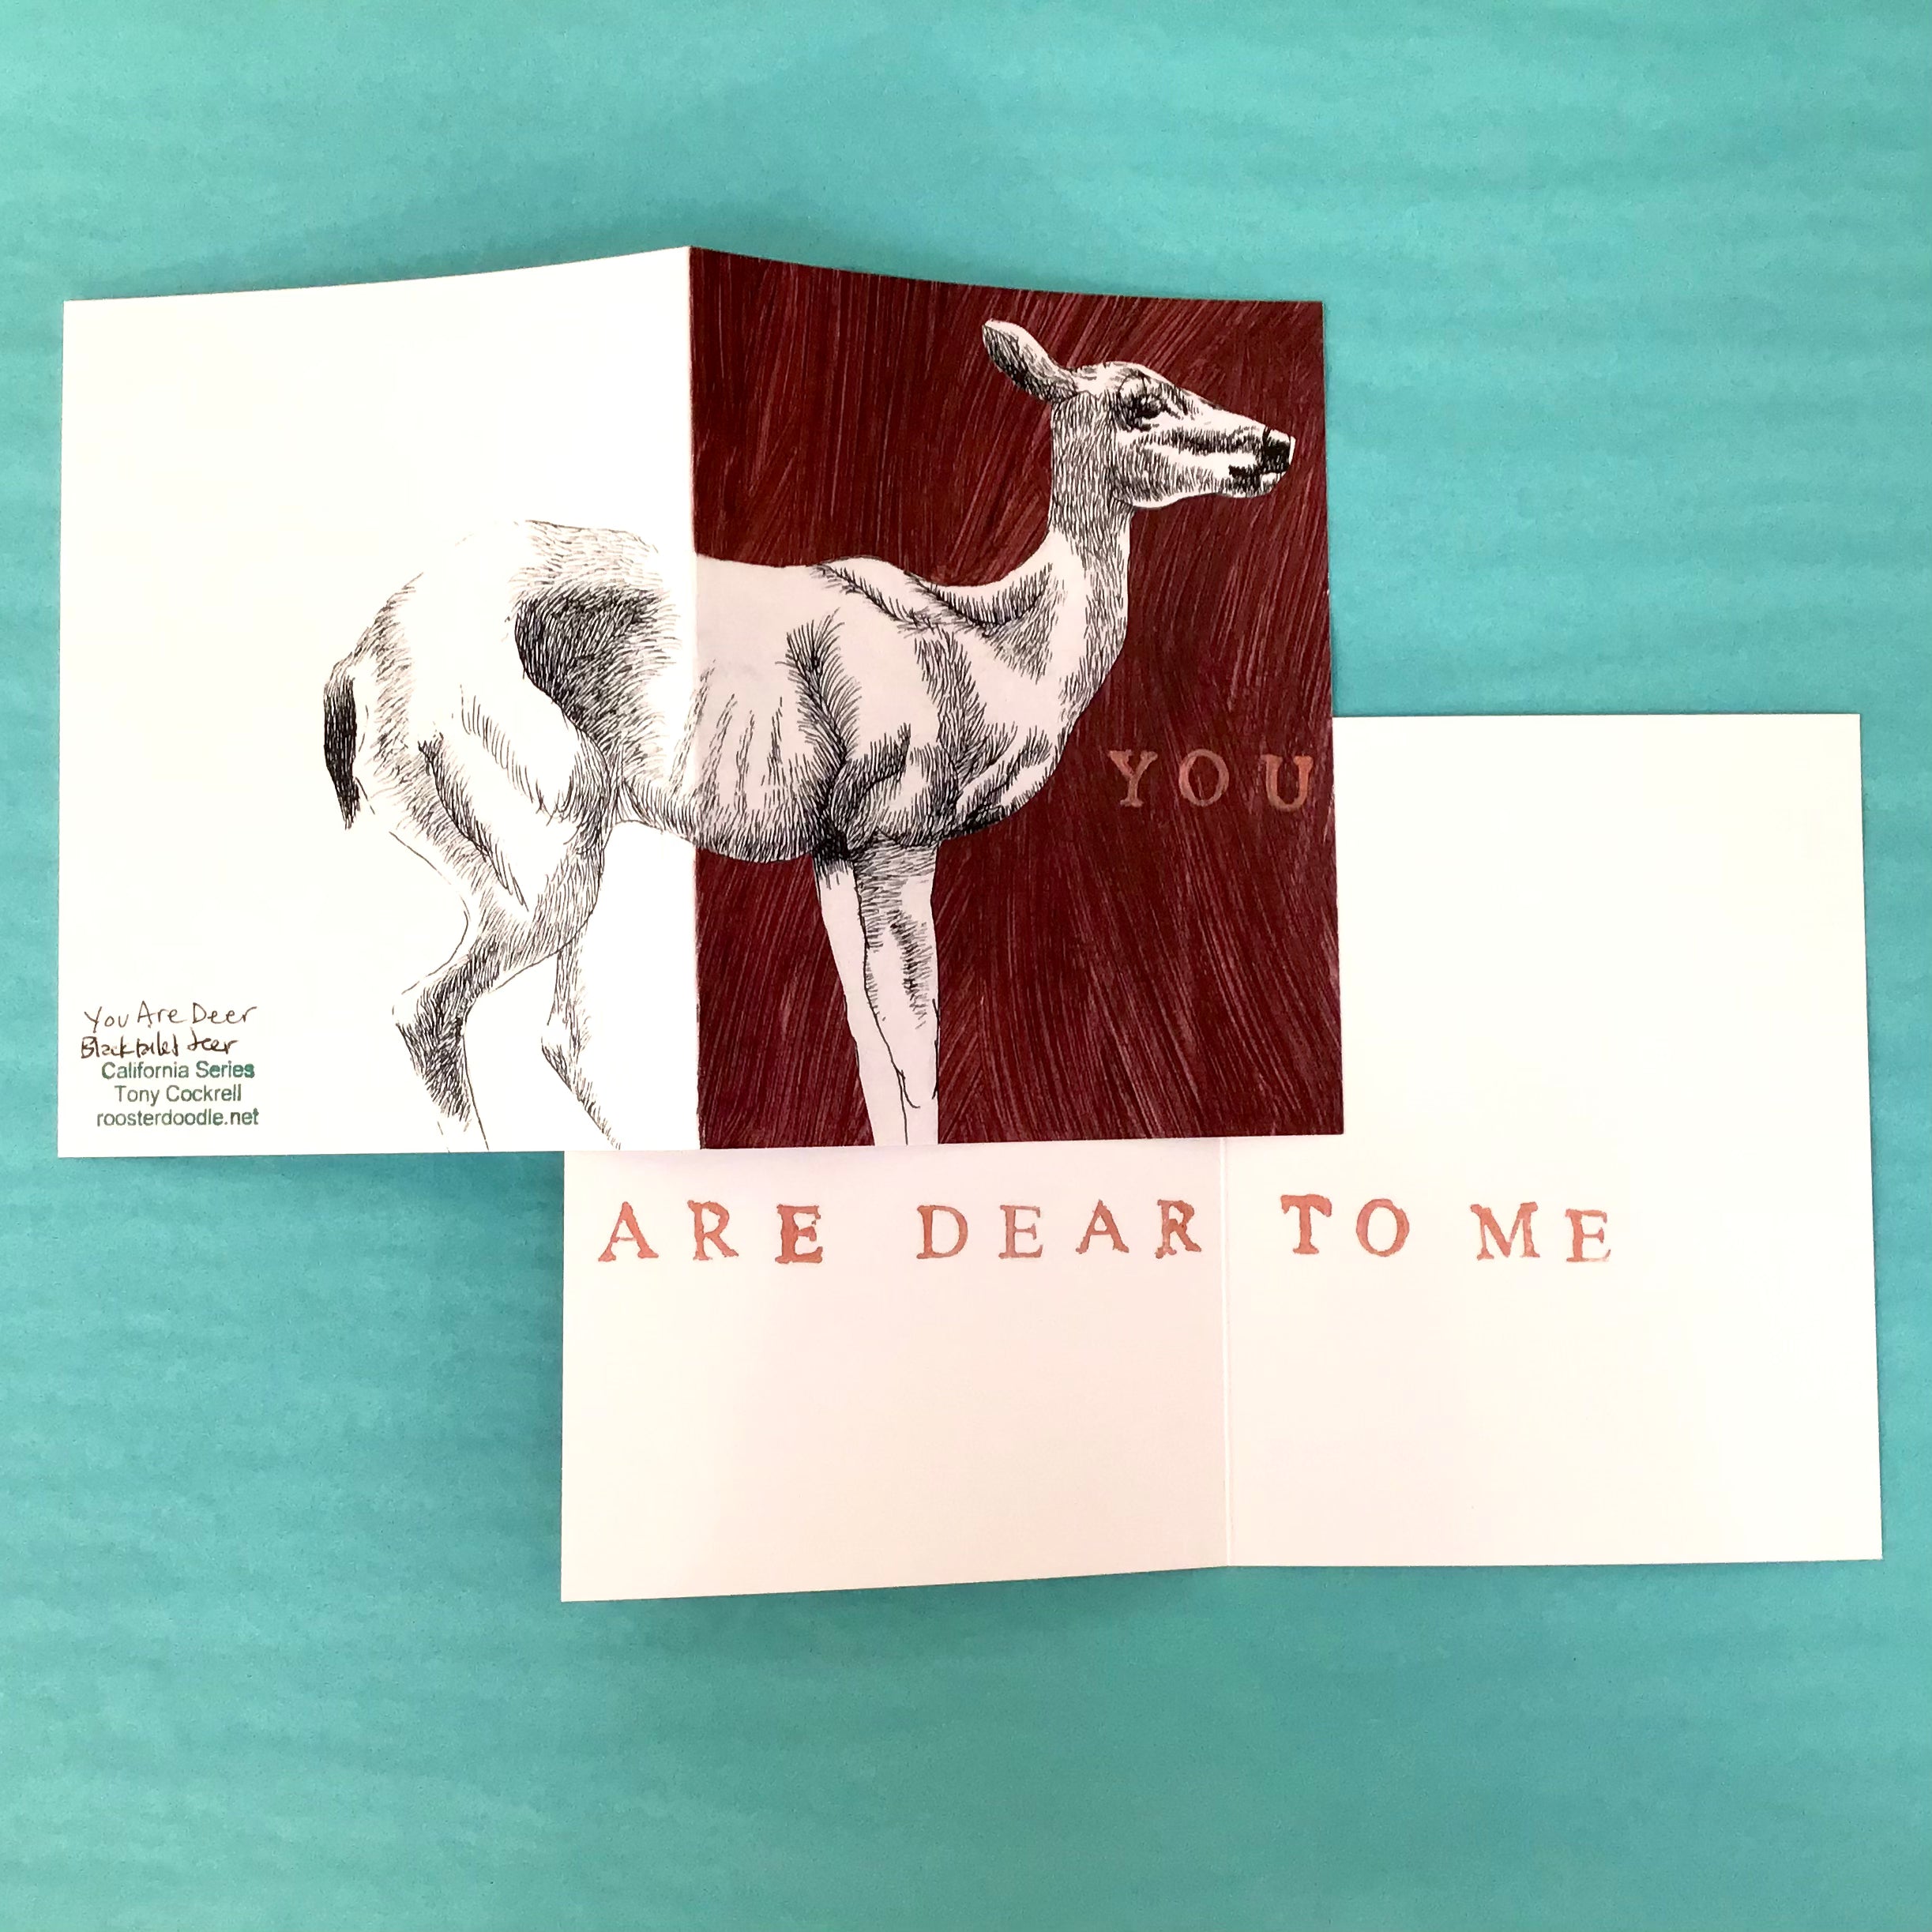 You are Dear to me Greeting Card